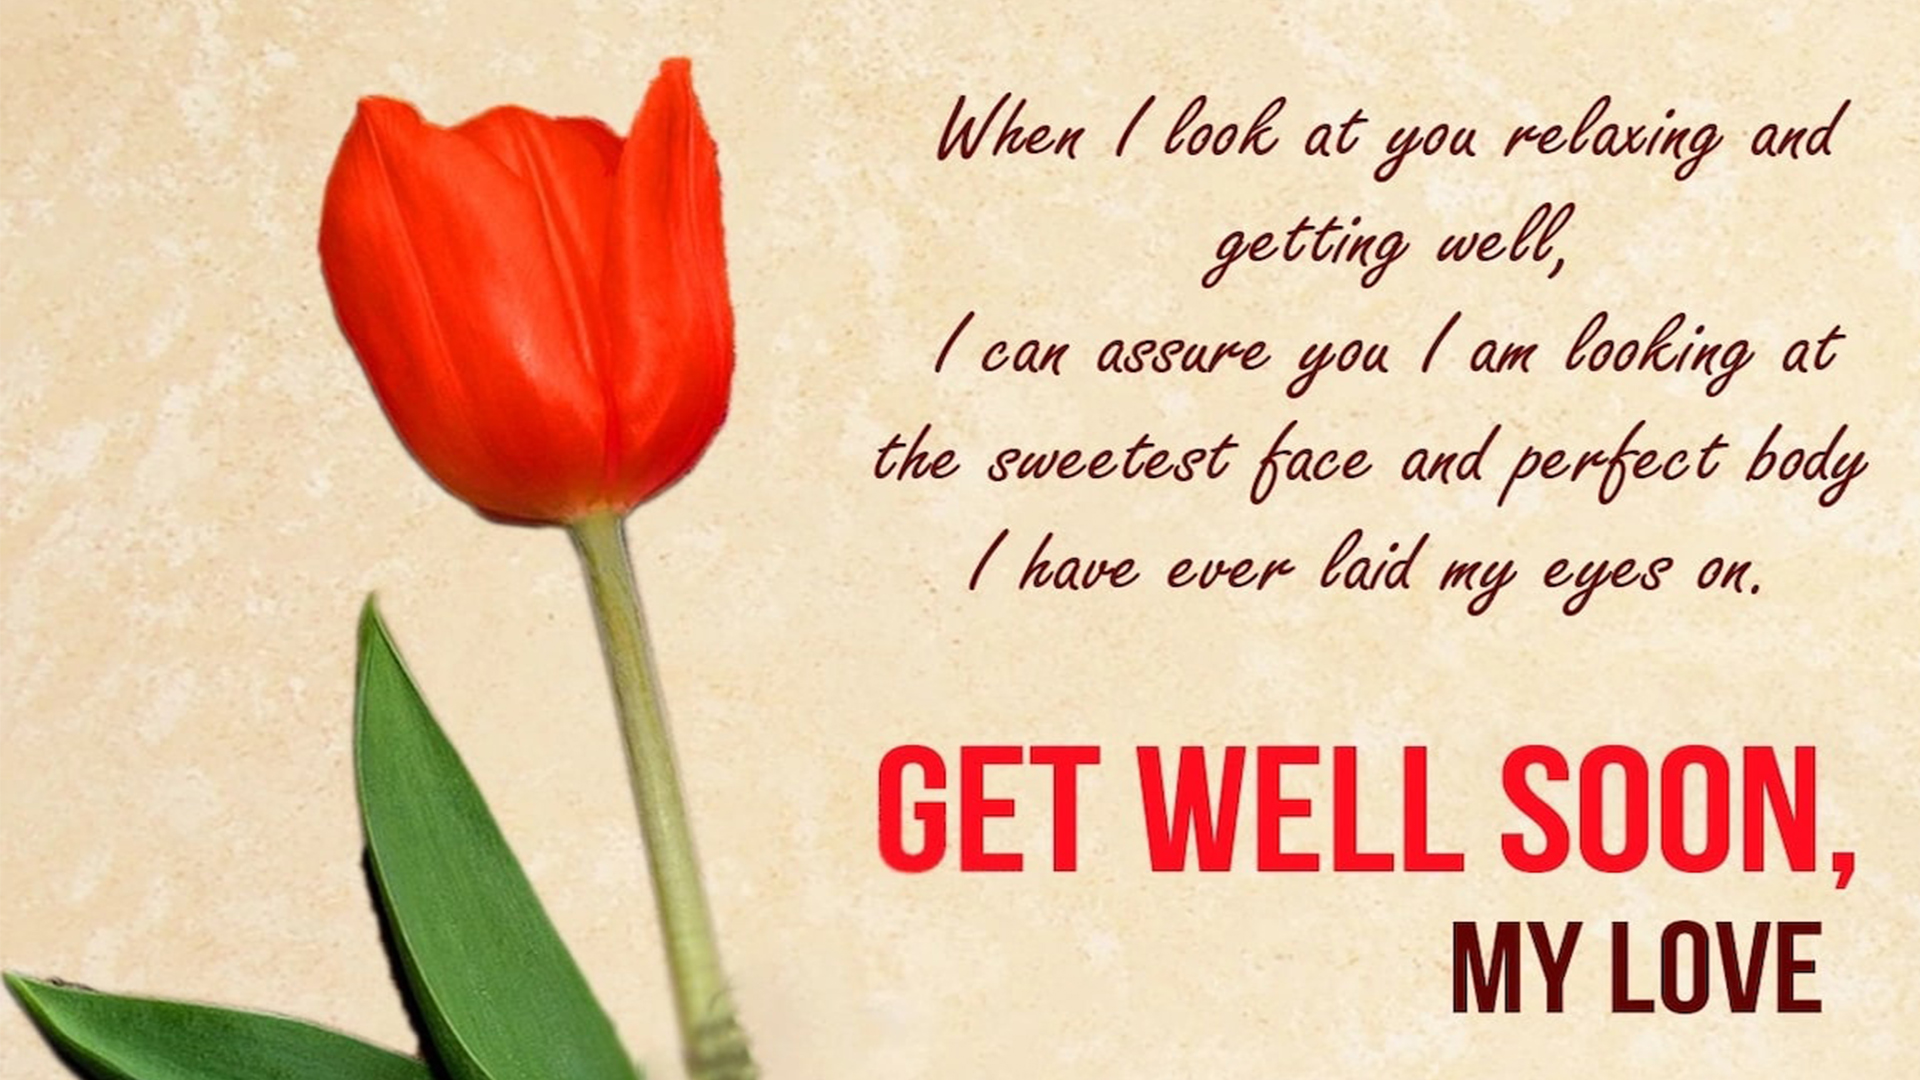 get well soon quotes hd image